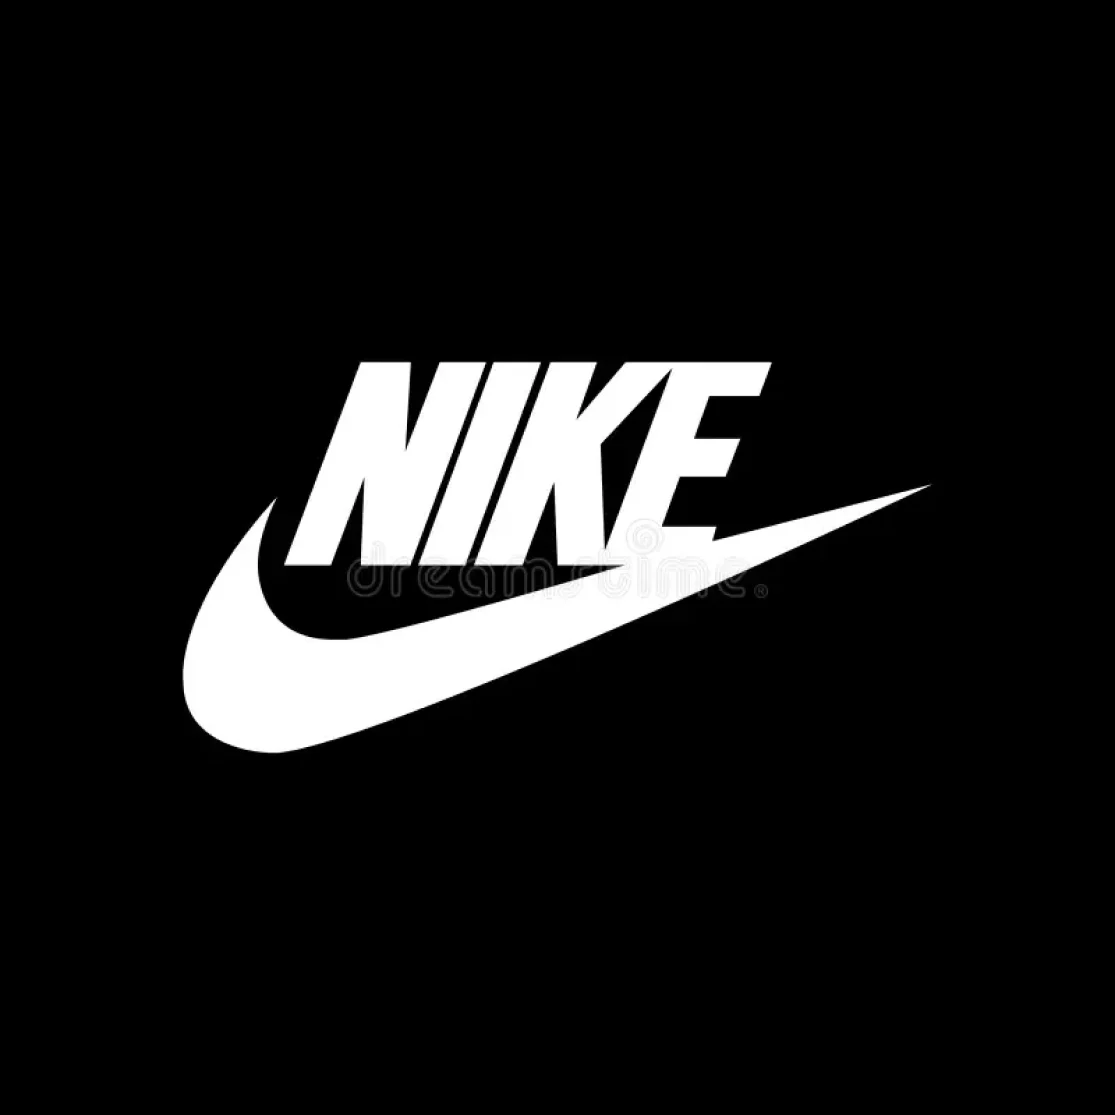 Free Shipping On $50+ For Nike Members